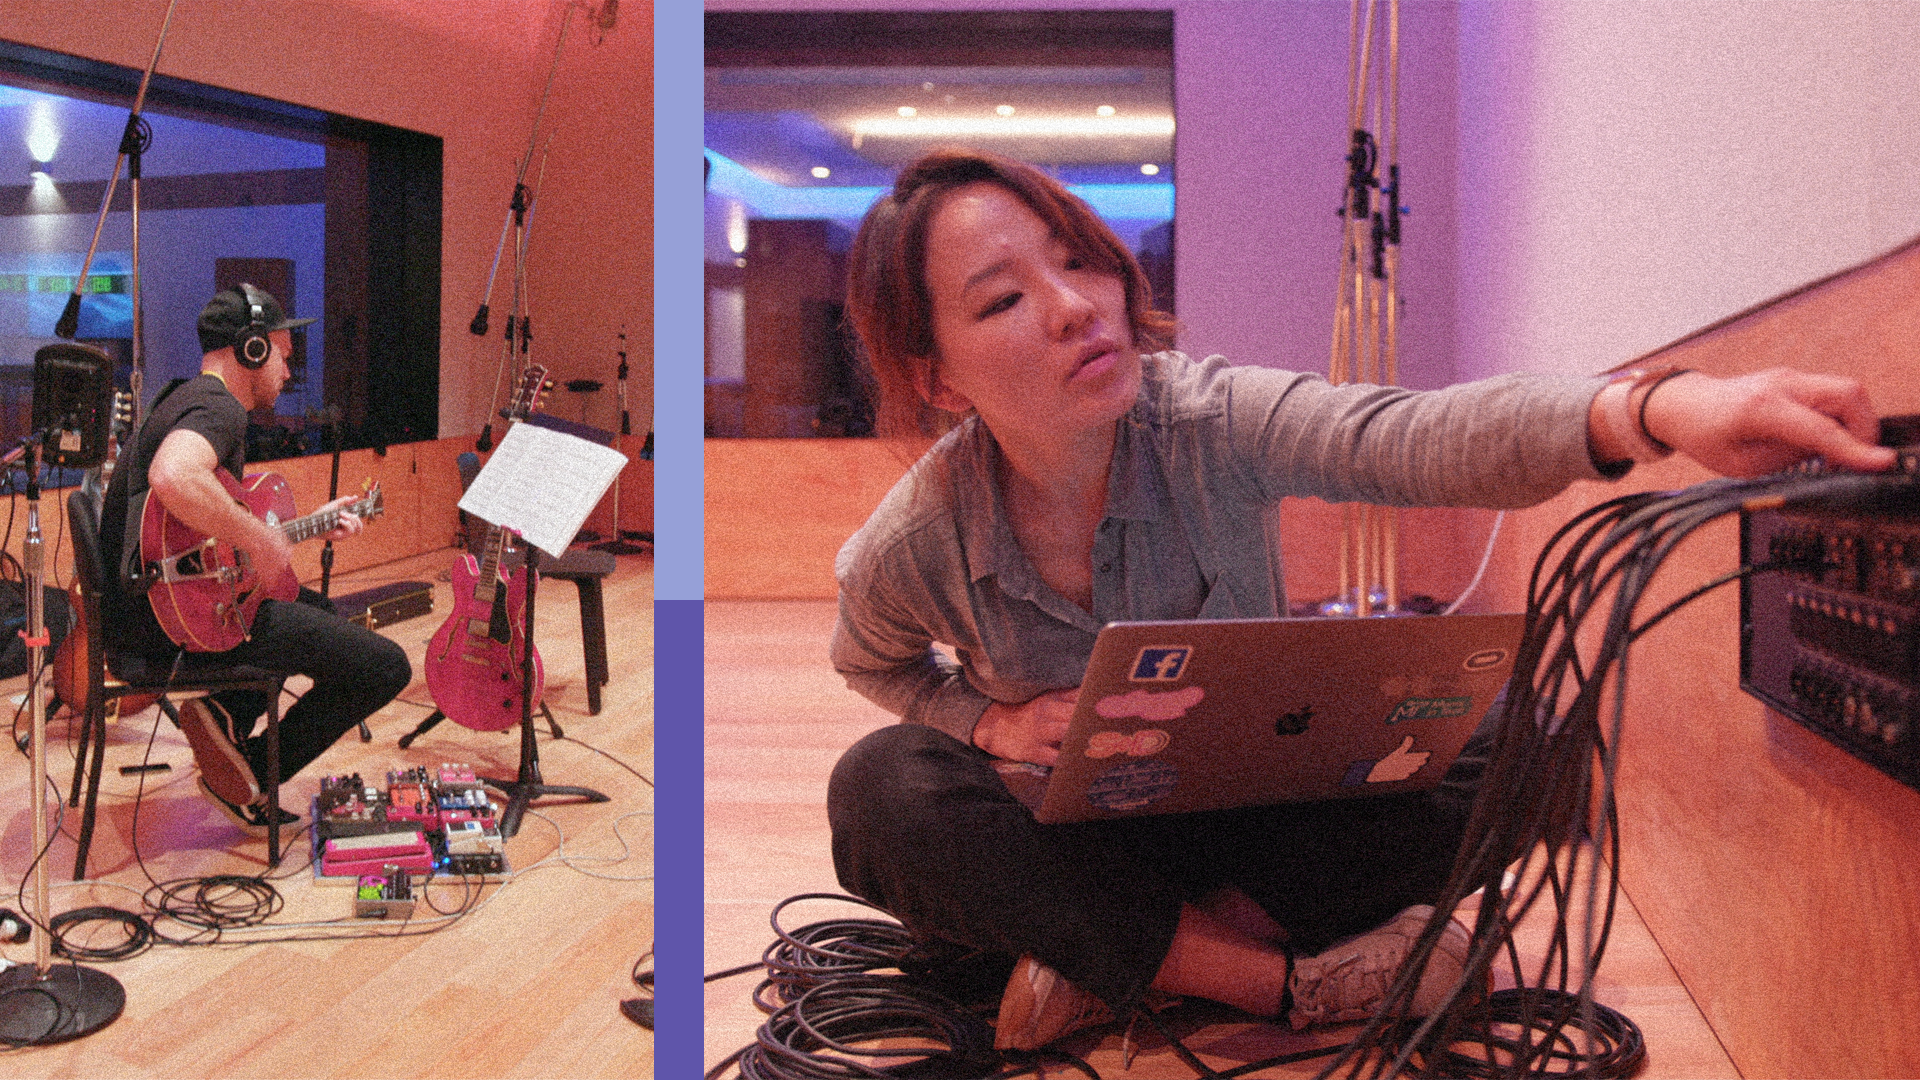 On the left, a musician plays a guitar in a studio. On the right, a technician connects a cord from a laptop to one of many jacks.